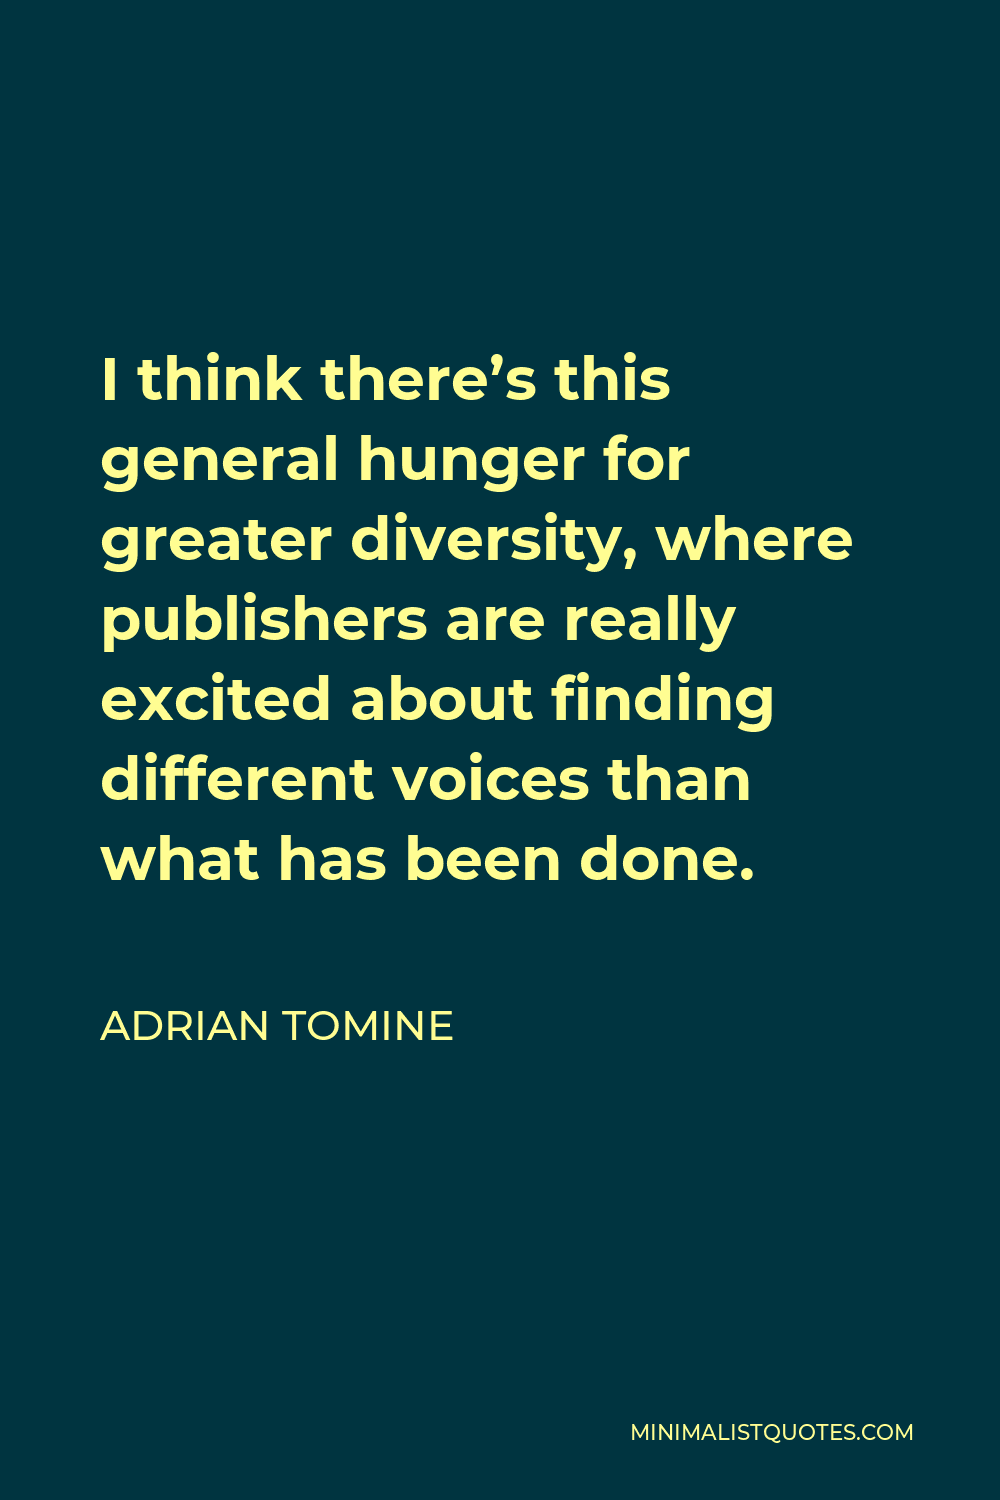 Adrian Tomine Quote - I think there’s this general hunger for greater diversity, where publishers are really excited about finding different voices than what has been done.